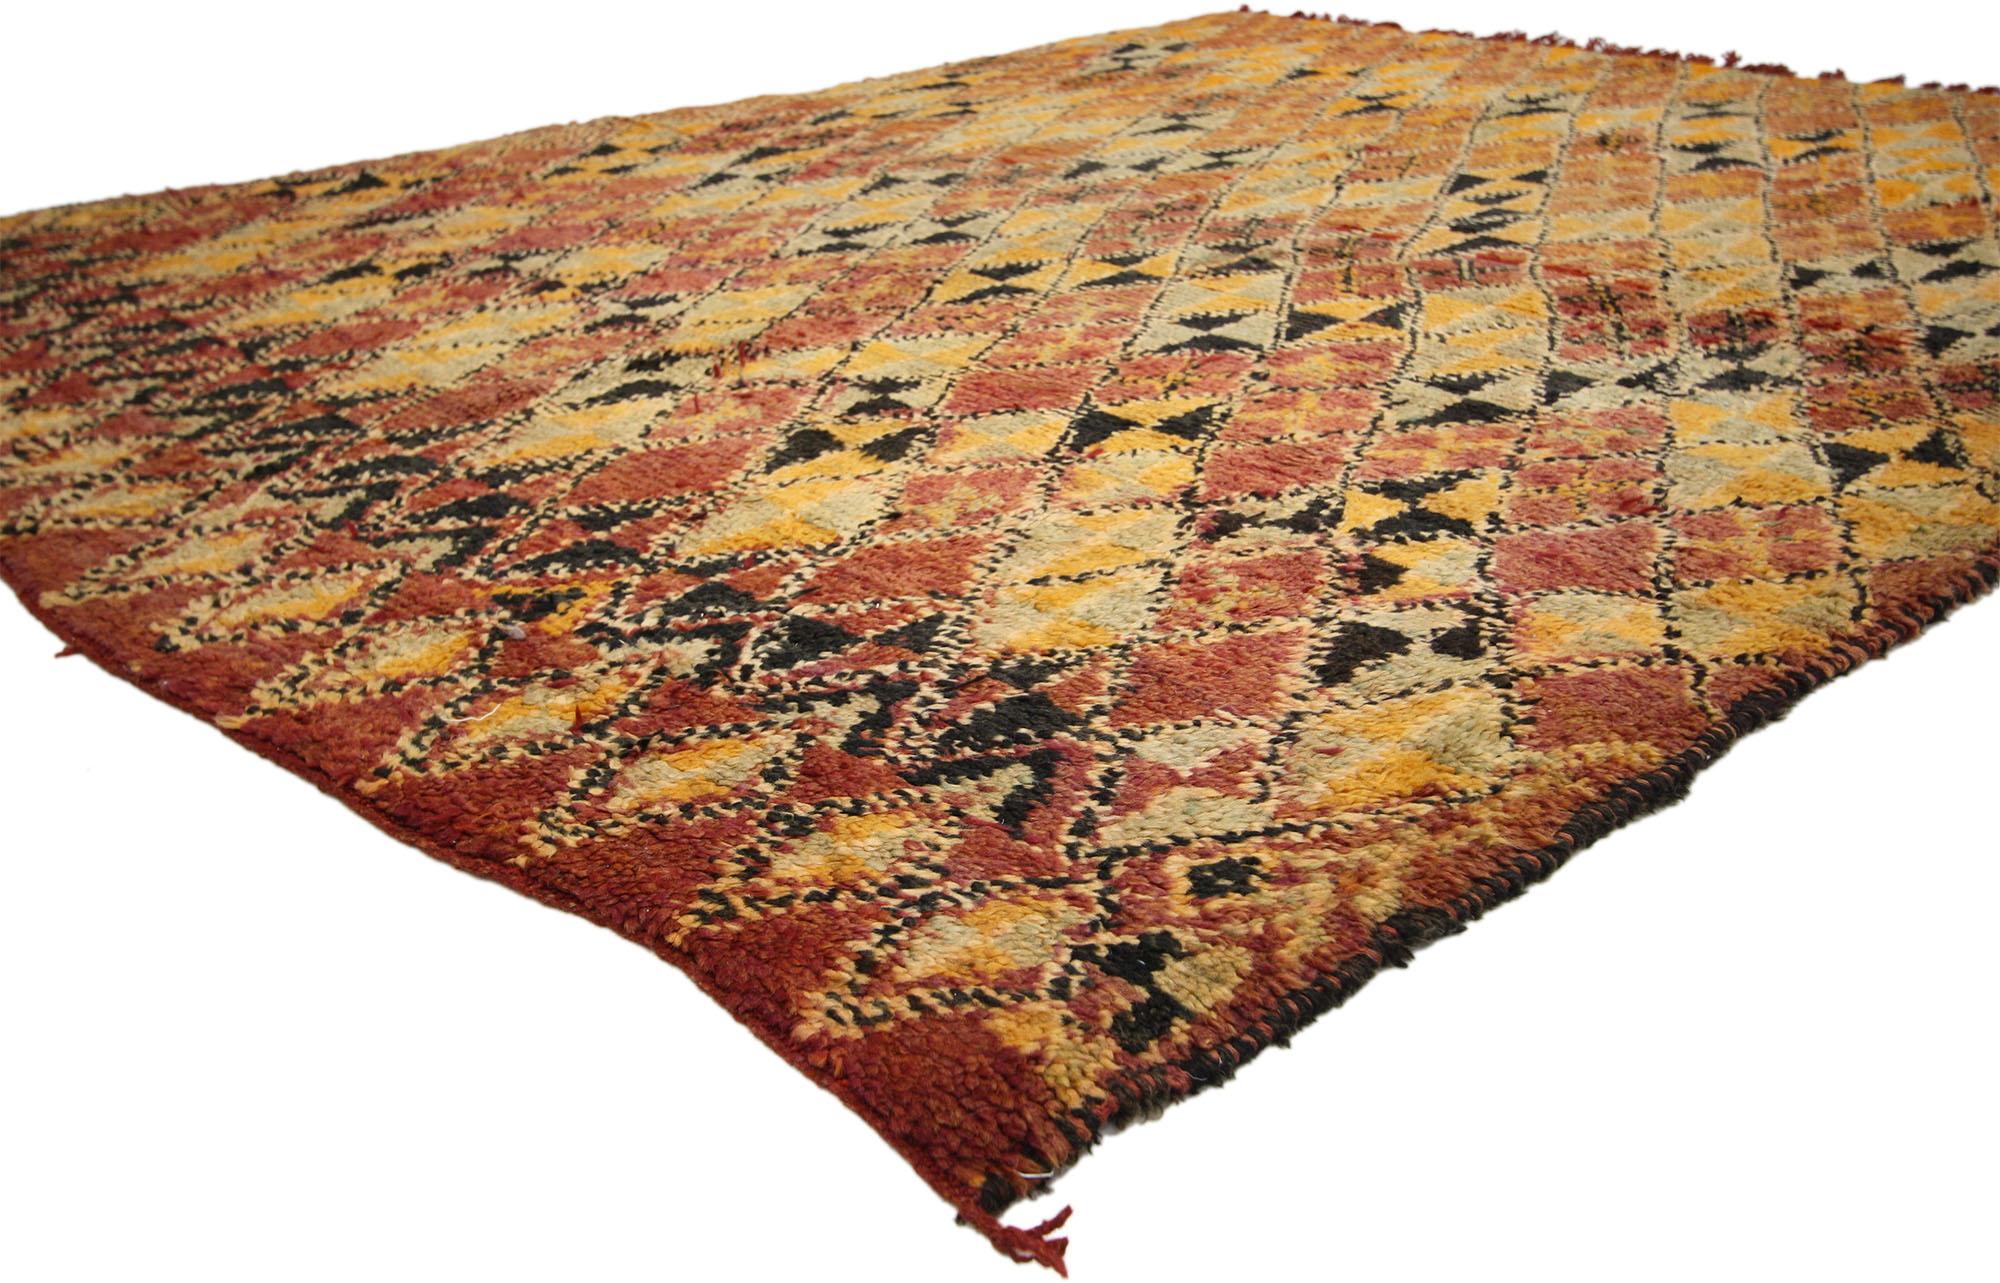 74516 Vintage Berber Moroccan Rug with Modern Style 06'05 x 08'06. Warm and inviting, this hand-knotted wool vintage Berber Moroccan rug is  a captivating vision of woven beauty. The abrashed field features an all-over geometric pattern composed of